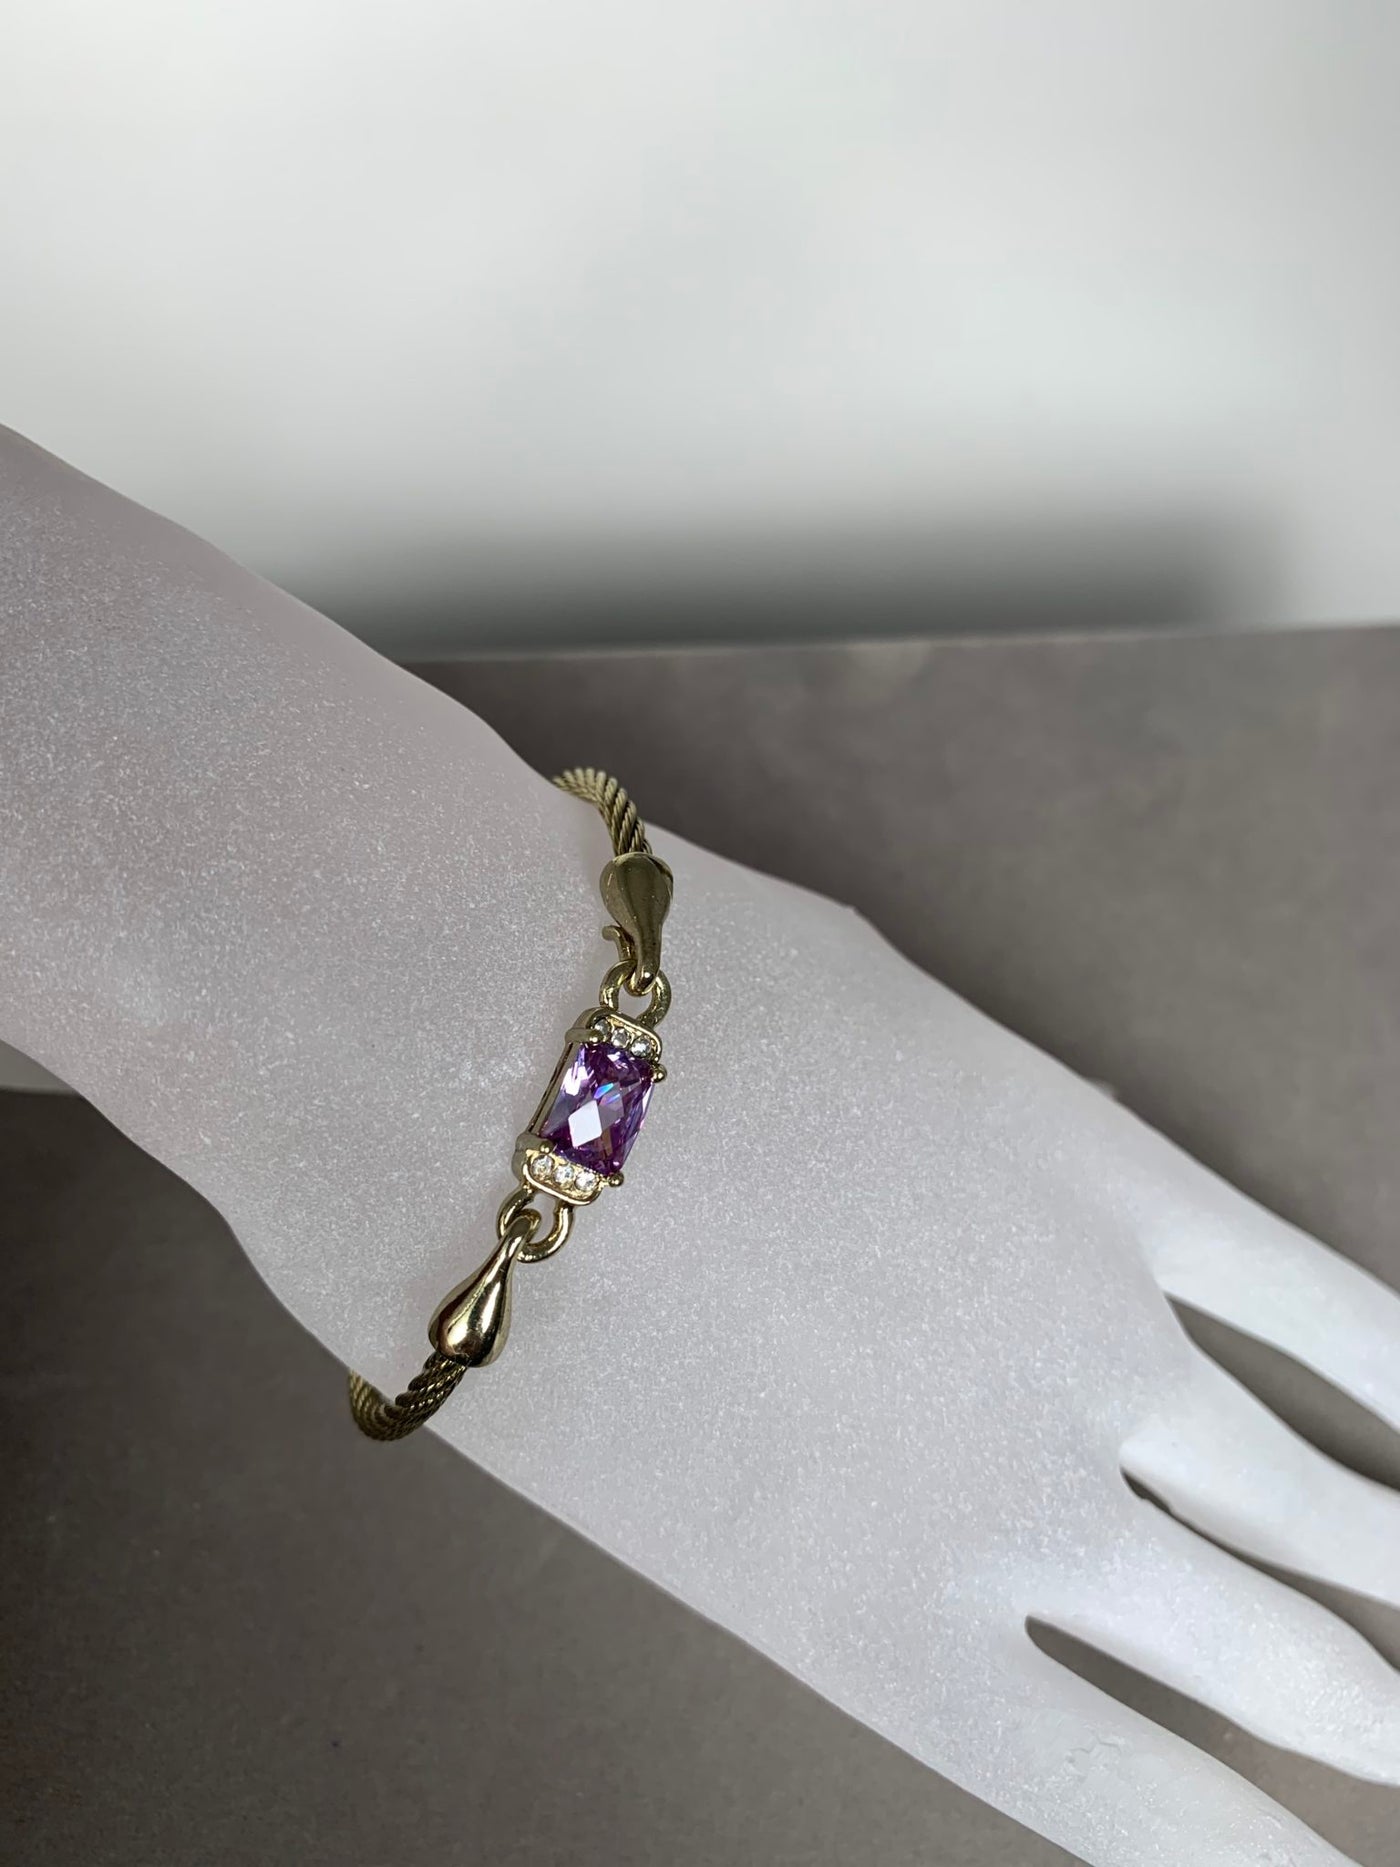 Yellow Gold Tone Wire Bangle Bracelet featuring Purple Crystal